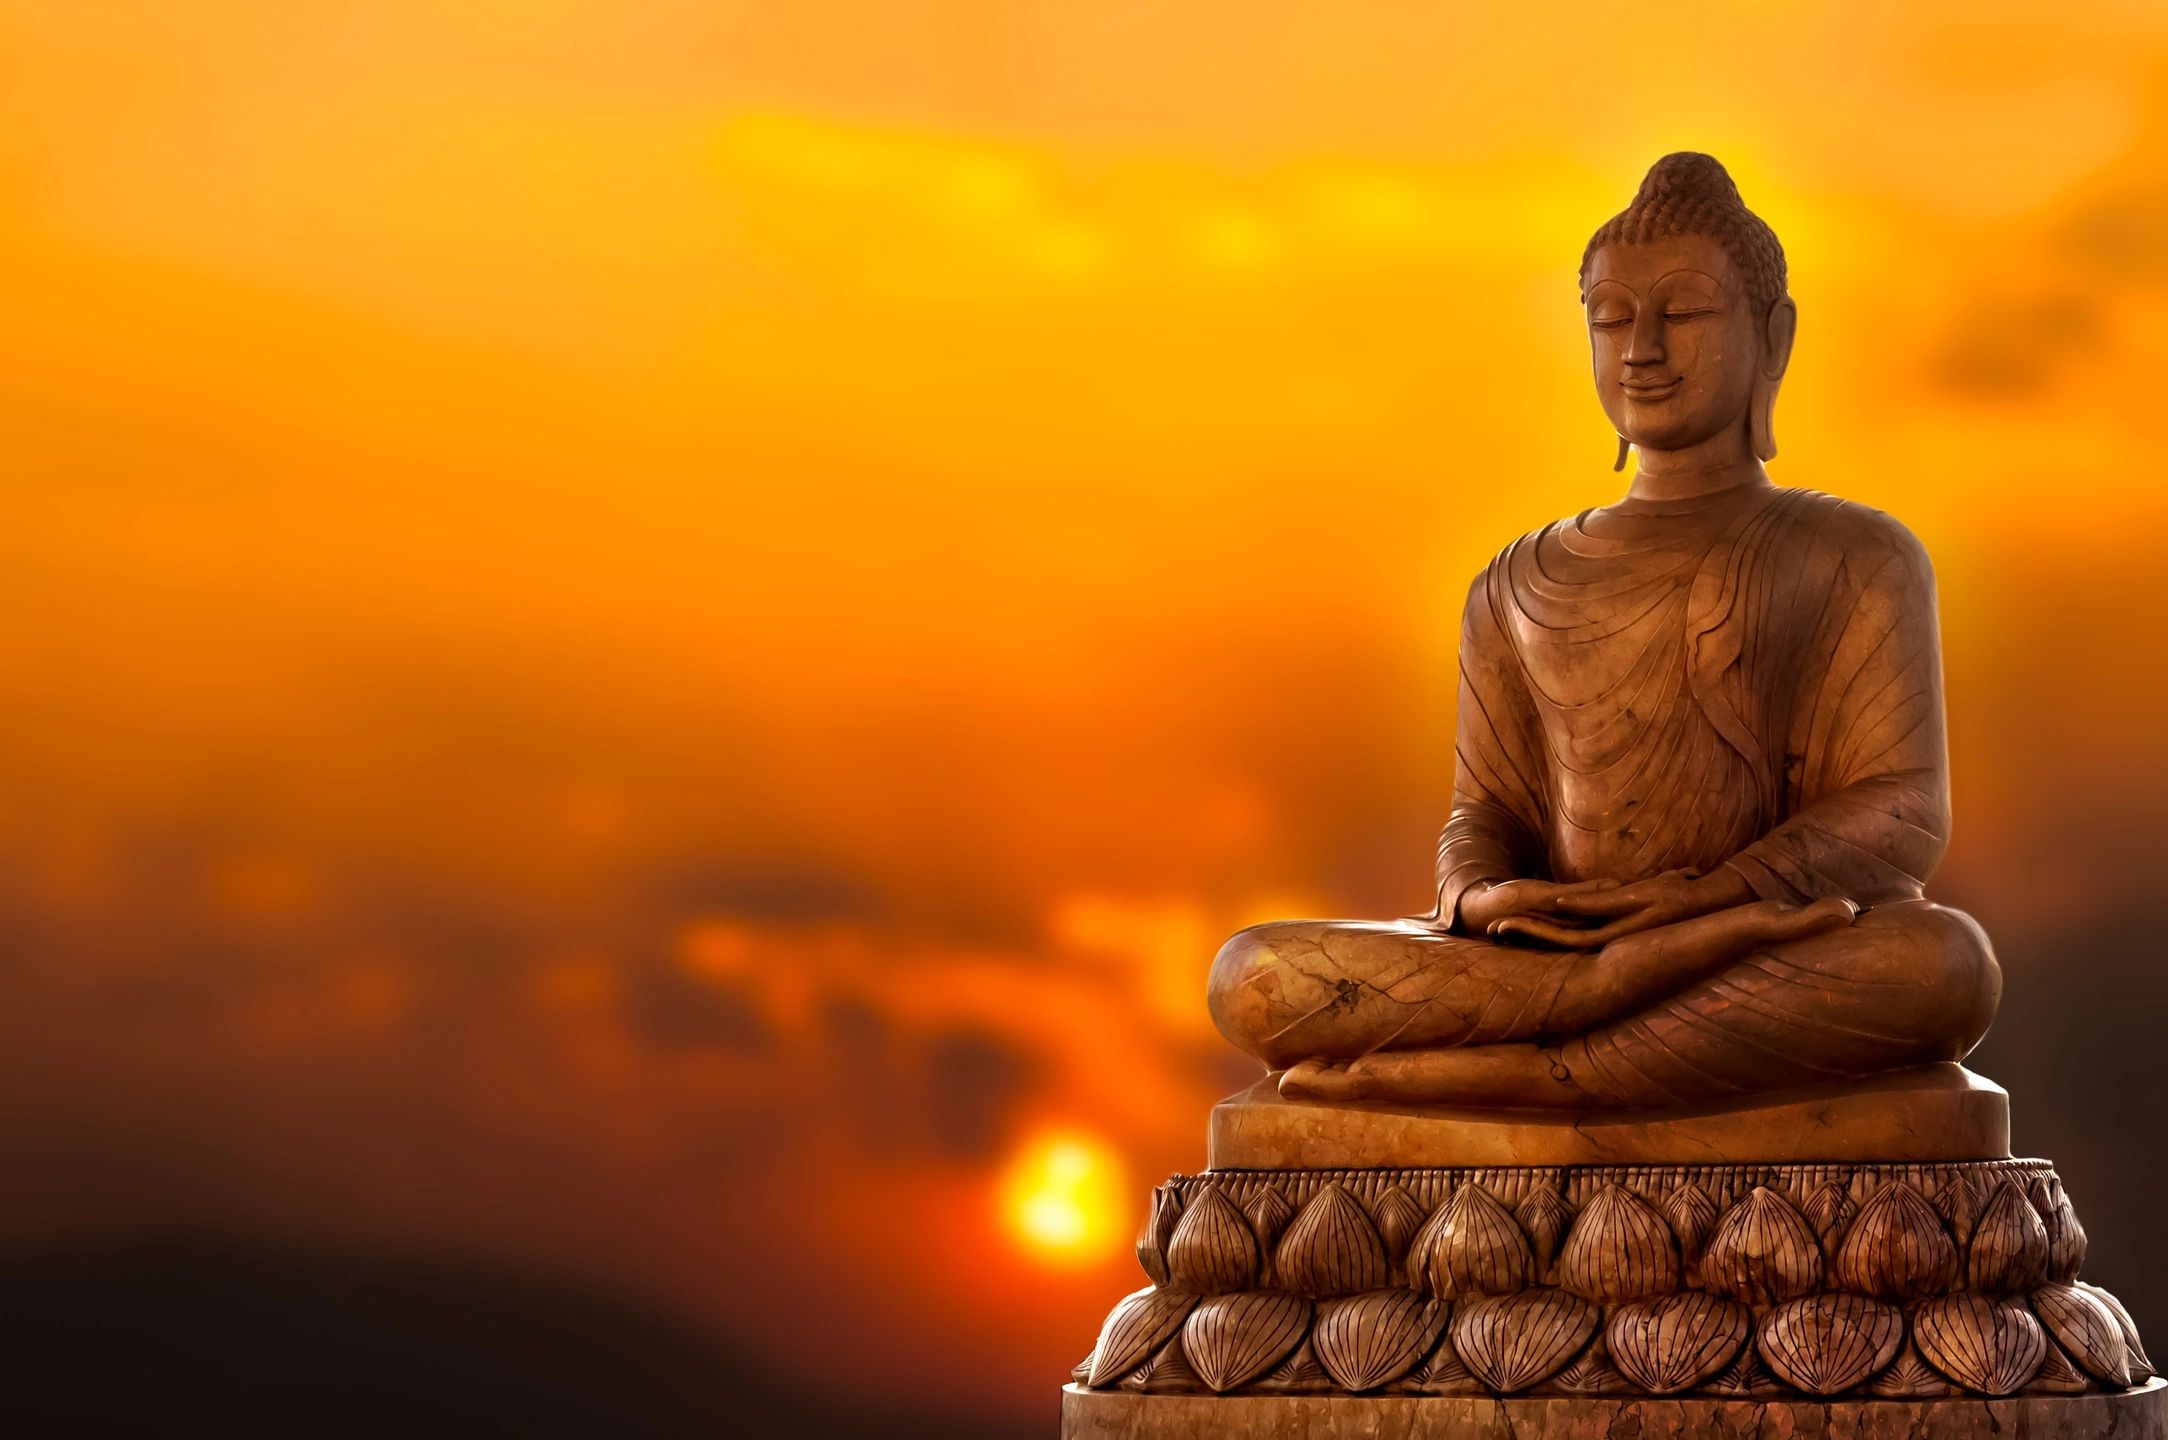 A serene statue of a sitting Buddha is shown against a vibrant orange and yellow sunset. The Buddha, depicted with a calm and peaceful expression, sits cross-legged on a lotus pedestal. The background is slightly blurred, enhancing the tranquil atmosphere reminiscent of mental health treatment at Khiron Clinics.